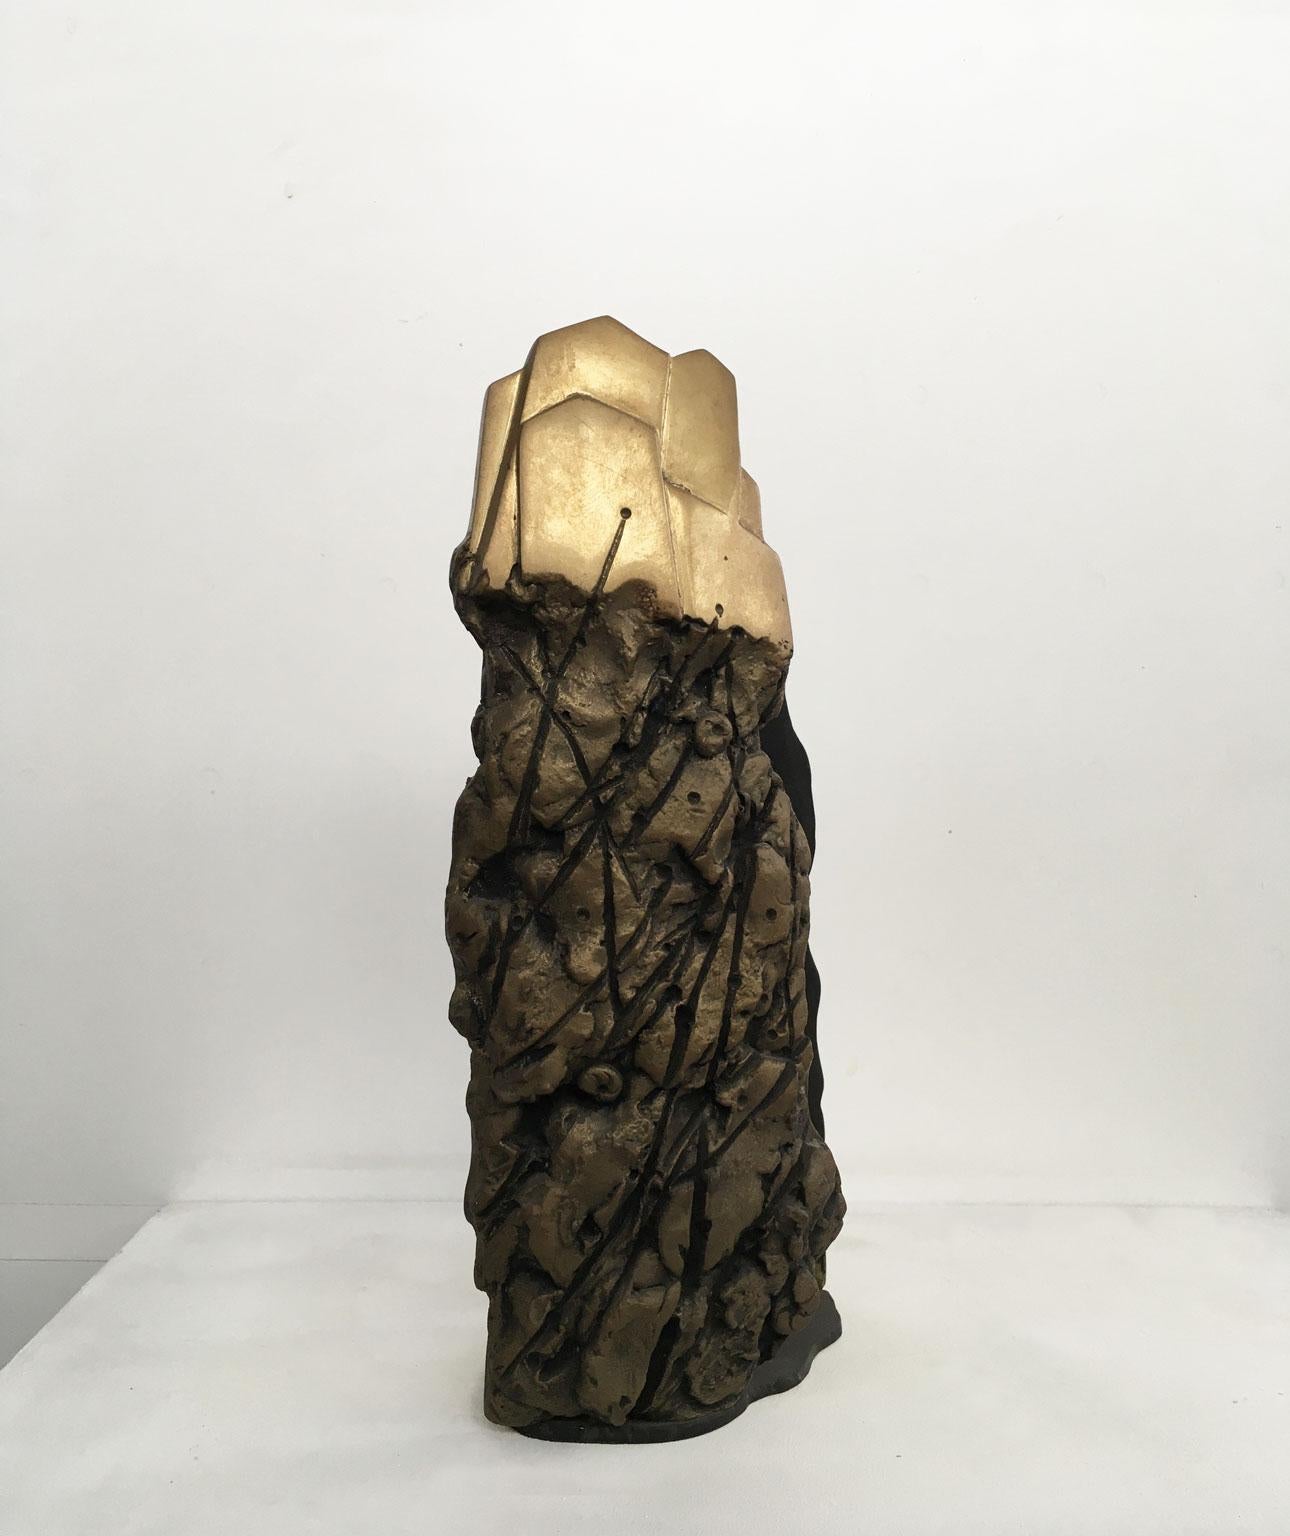 This intense and interesting abstract bronze sculpture, it is one of a kind artwork, made in 1979 circa by the Italian Artist Graziano Pompili
The title 